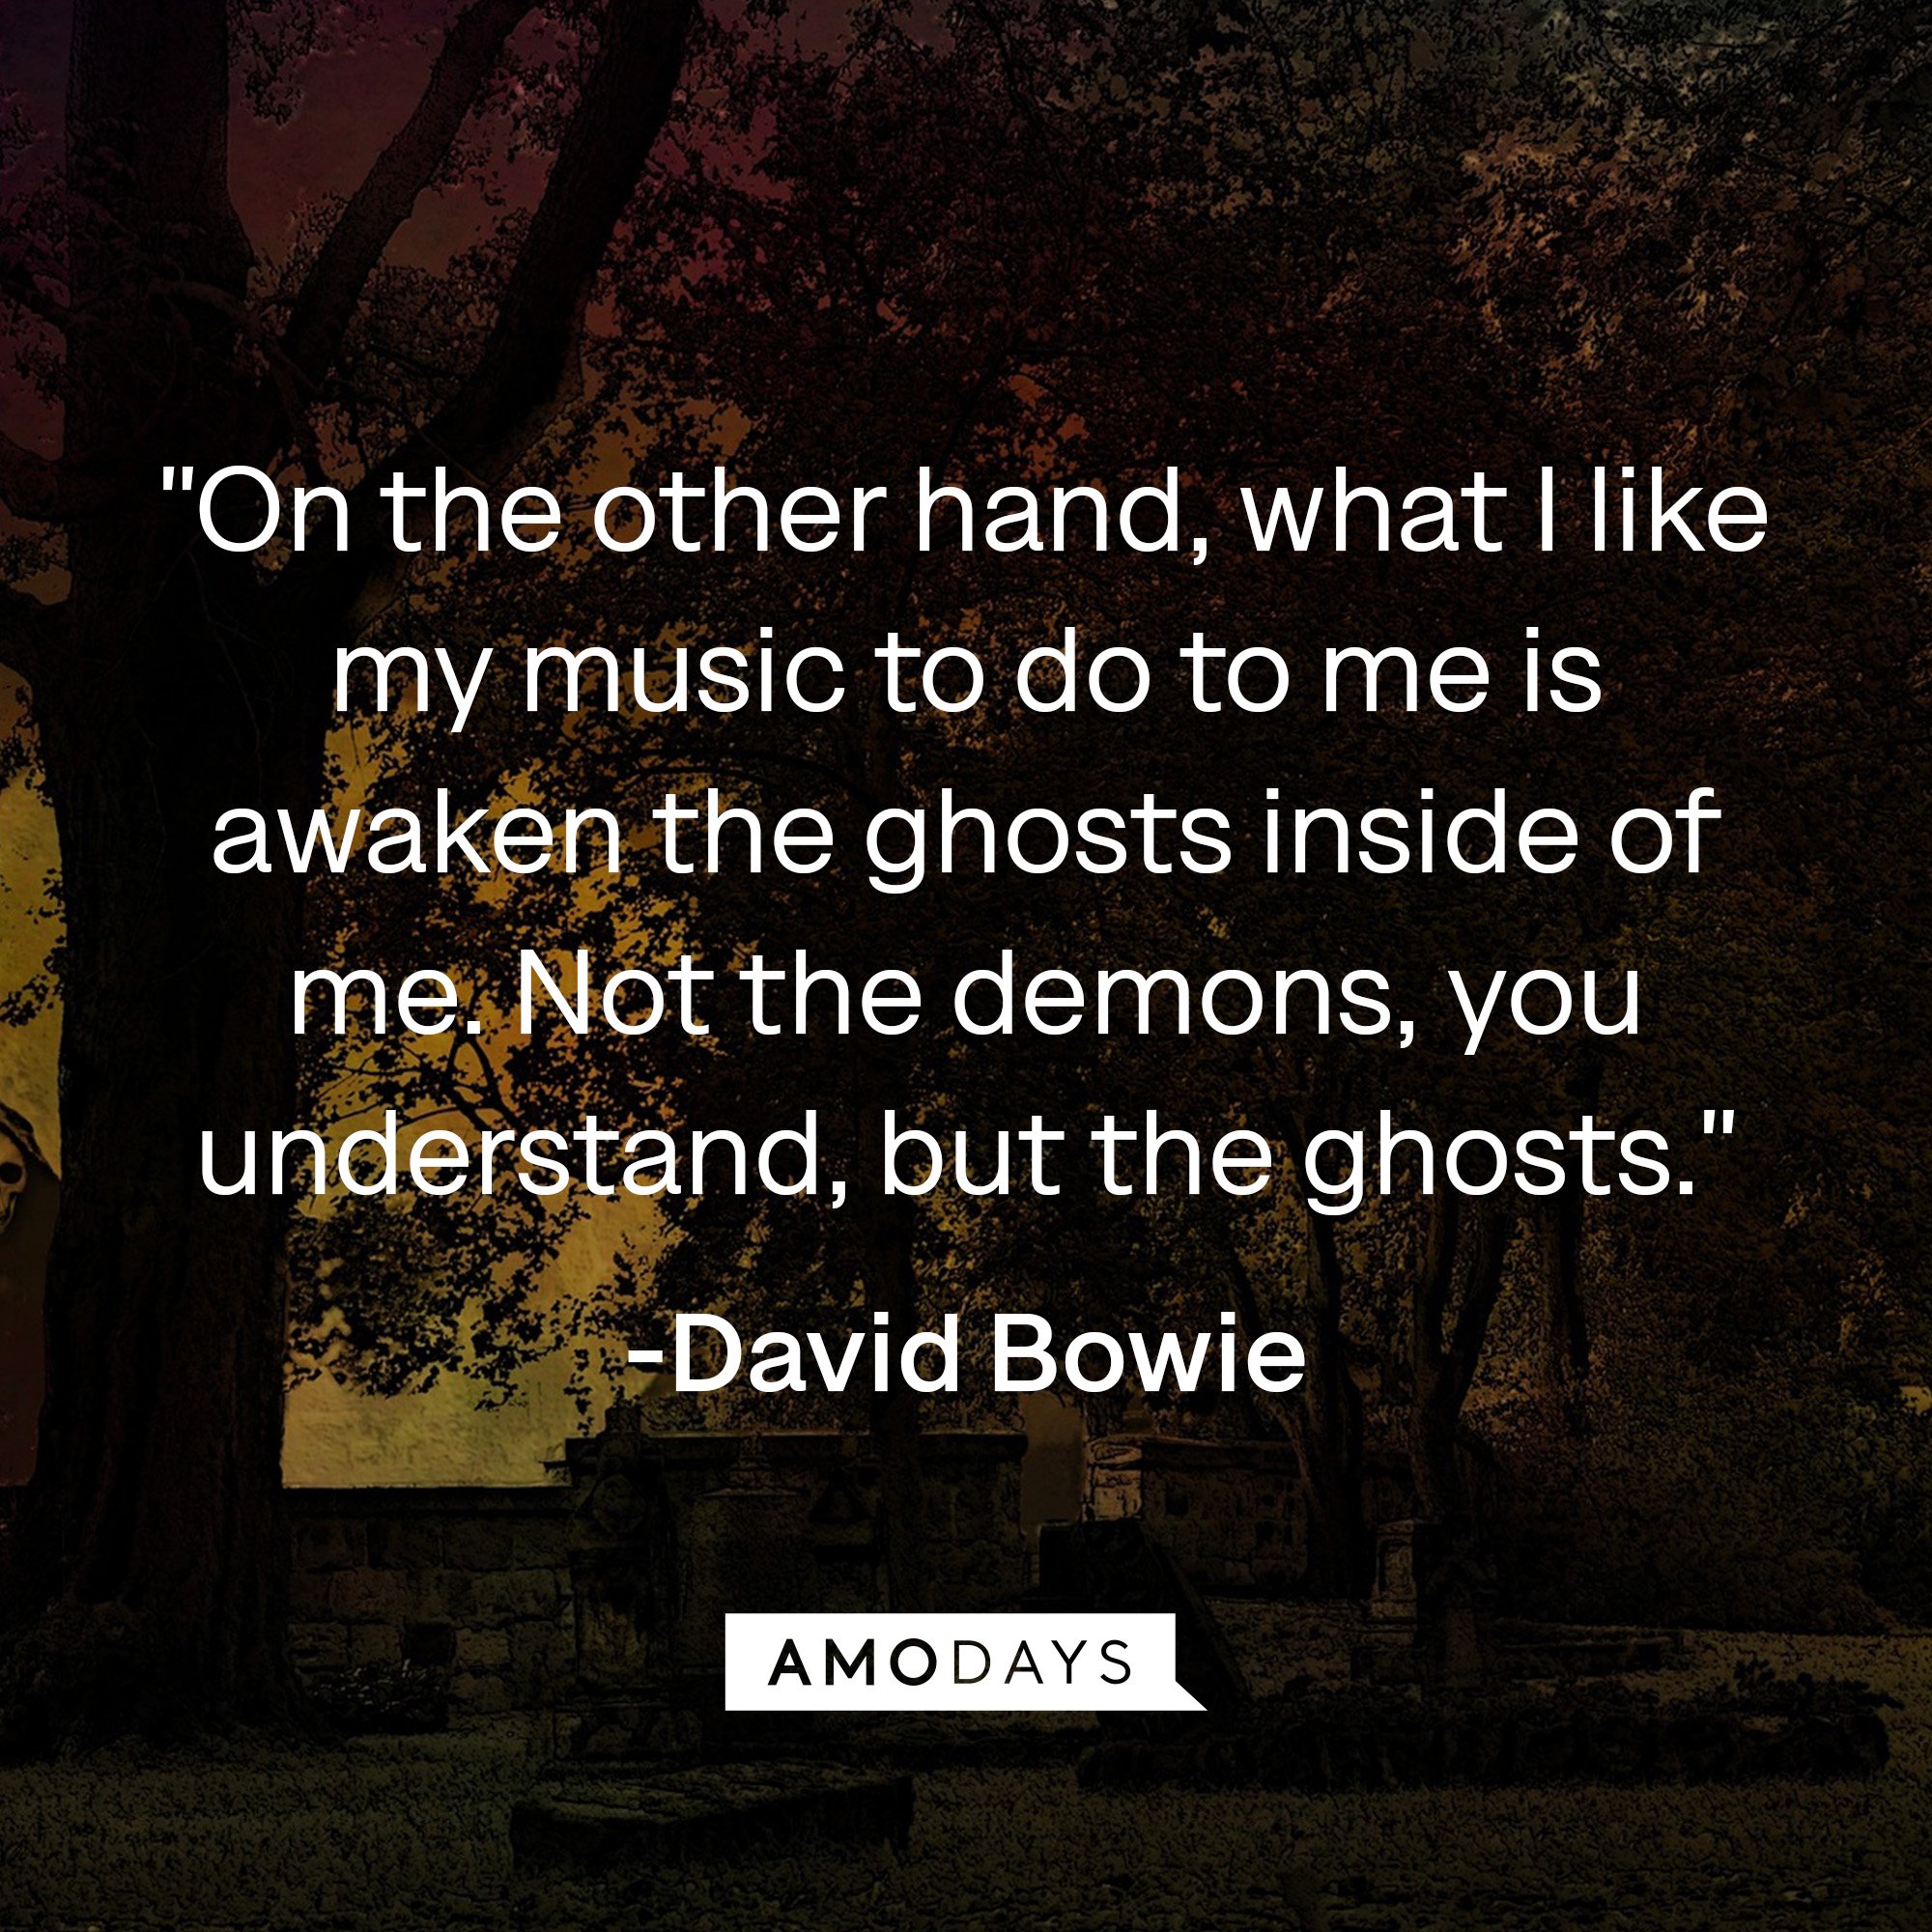  David Bowie’s quote: "On the other hand, what I like my music to do to me is awaken the ghosts inside of me. Not the demons, you understand, but the ghosts." | Image: AmoDays